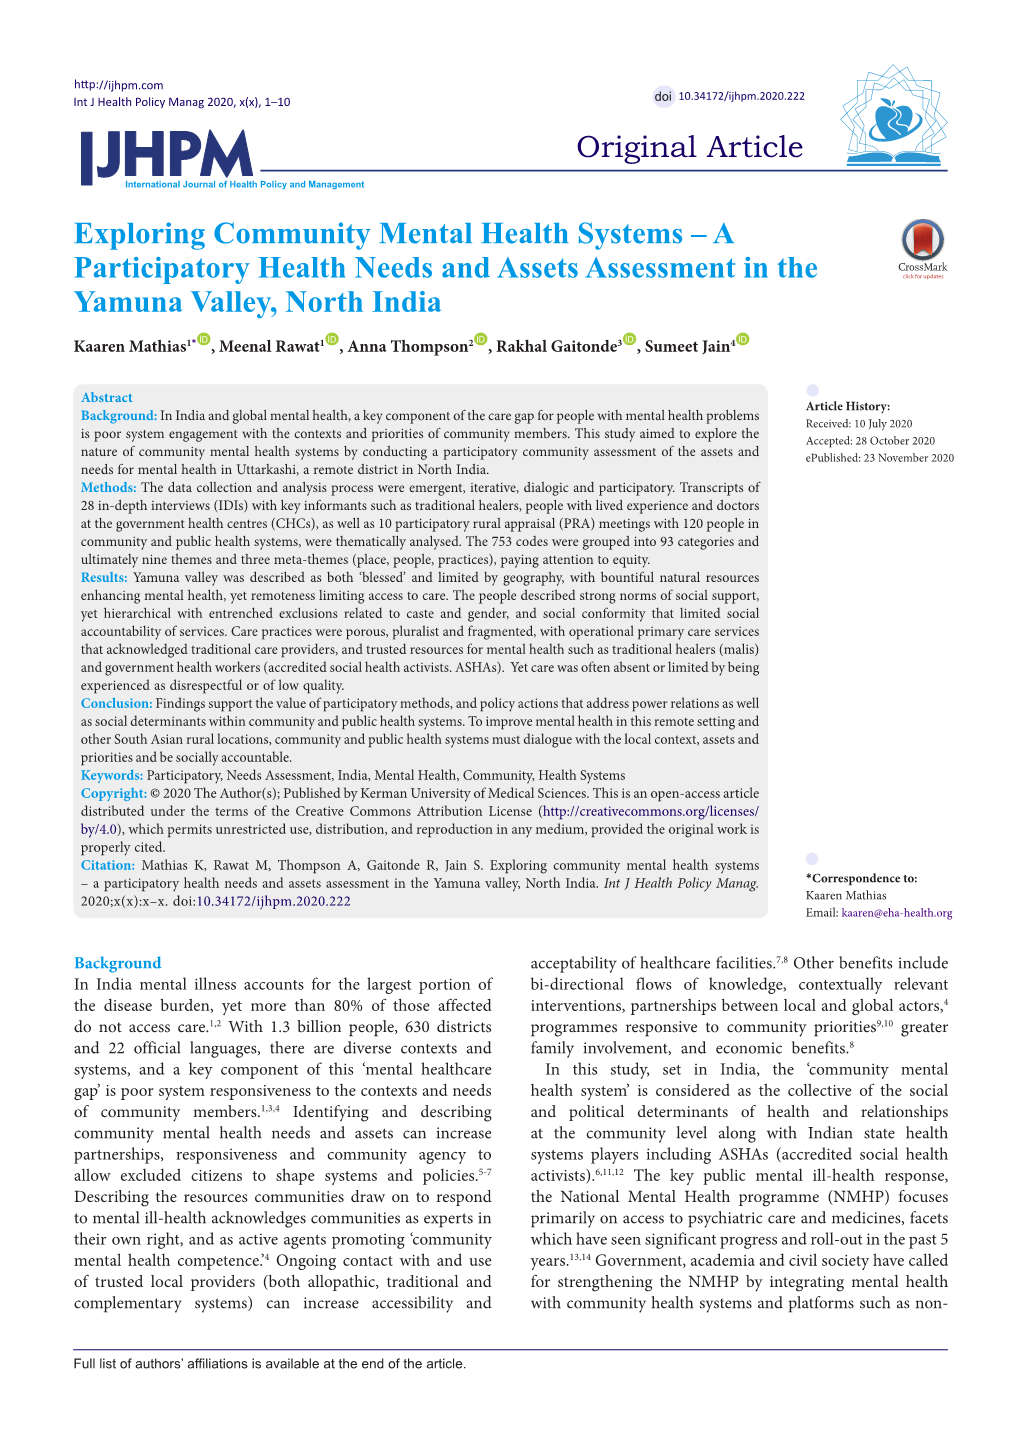 Exploring Community Mental Health Systems – a Participatory Health Needs and Assets Assessment in the Yamuna Valley, North India